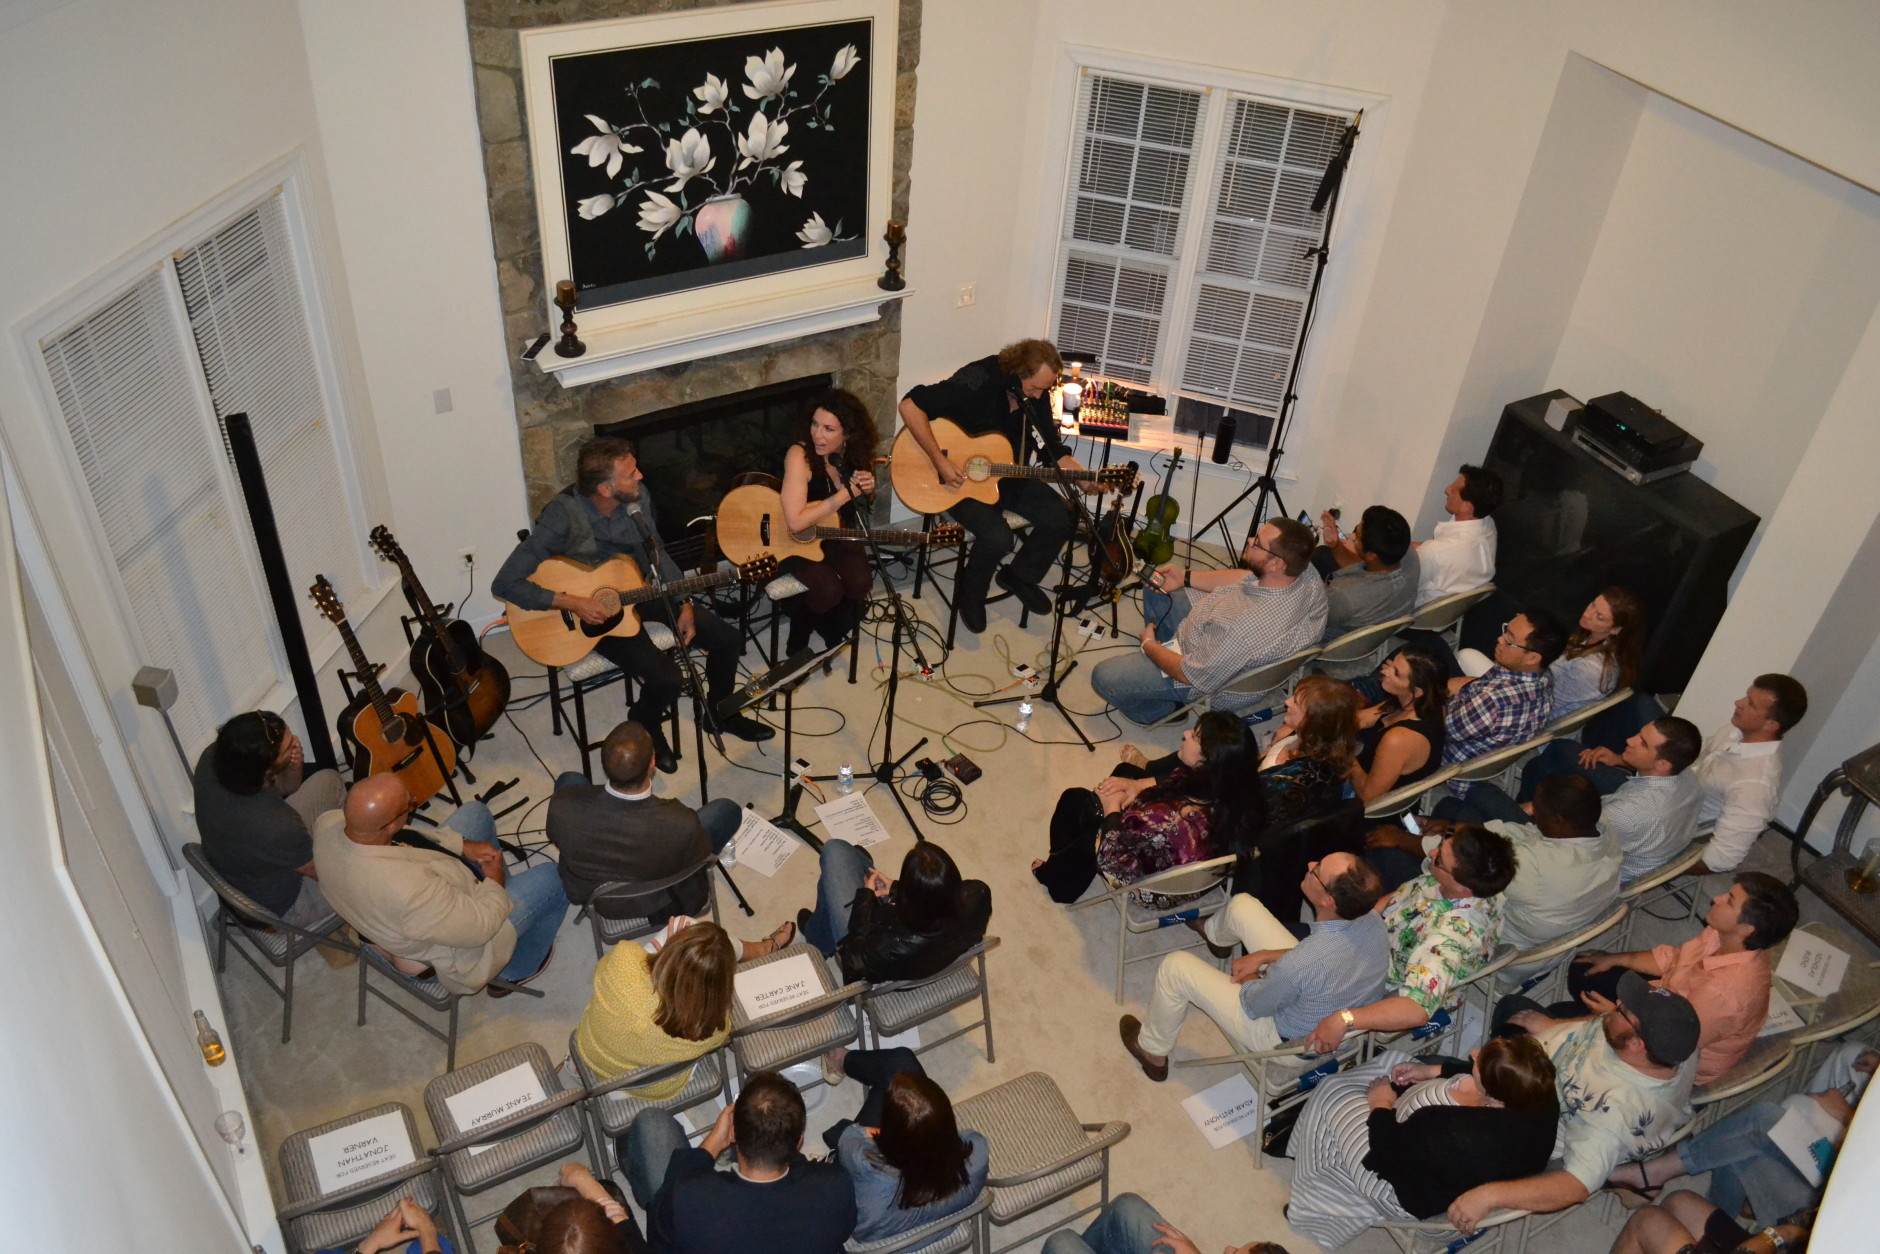 Around 50 people who donated were able to snag a seat for the living room concert on Sept. 13, 2015. (WTOP/Rahul Bali)